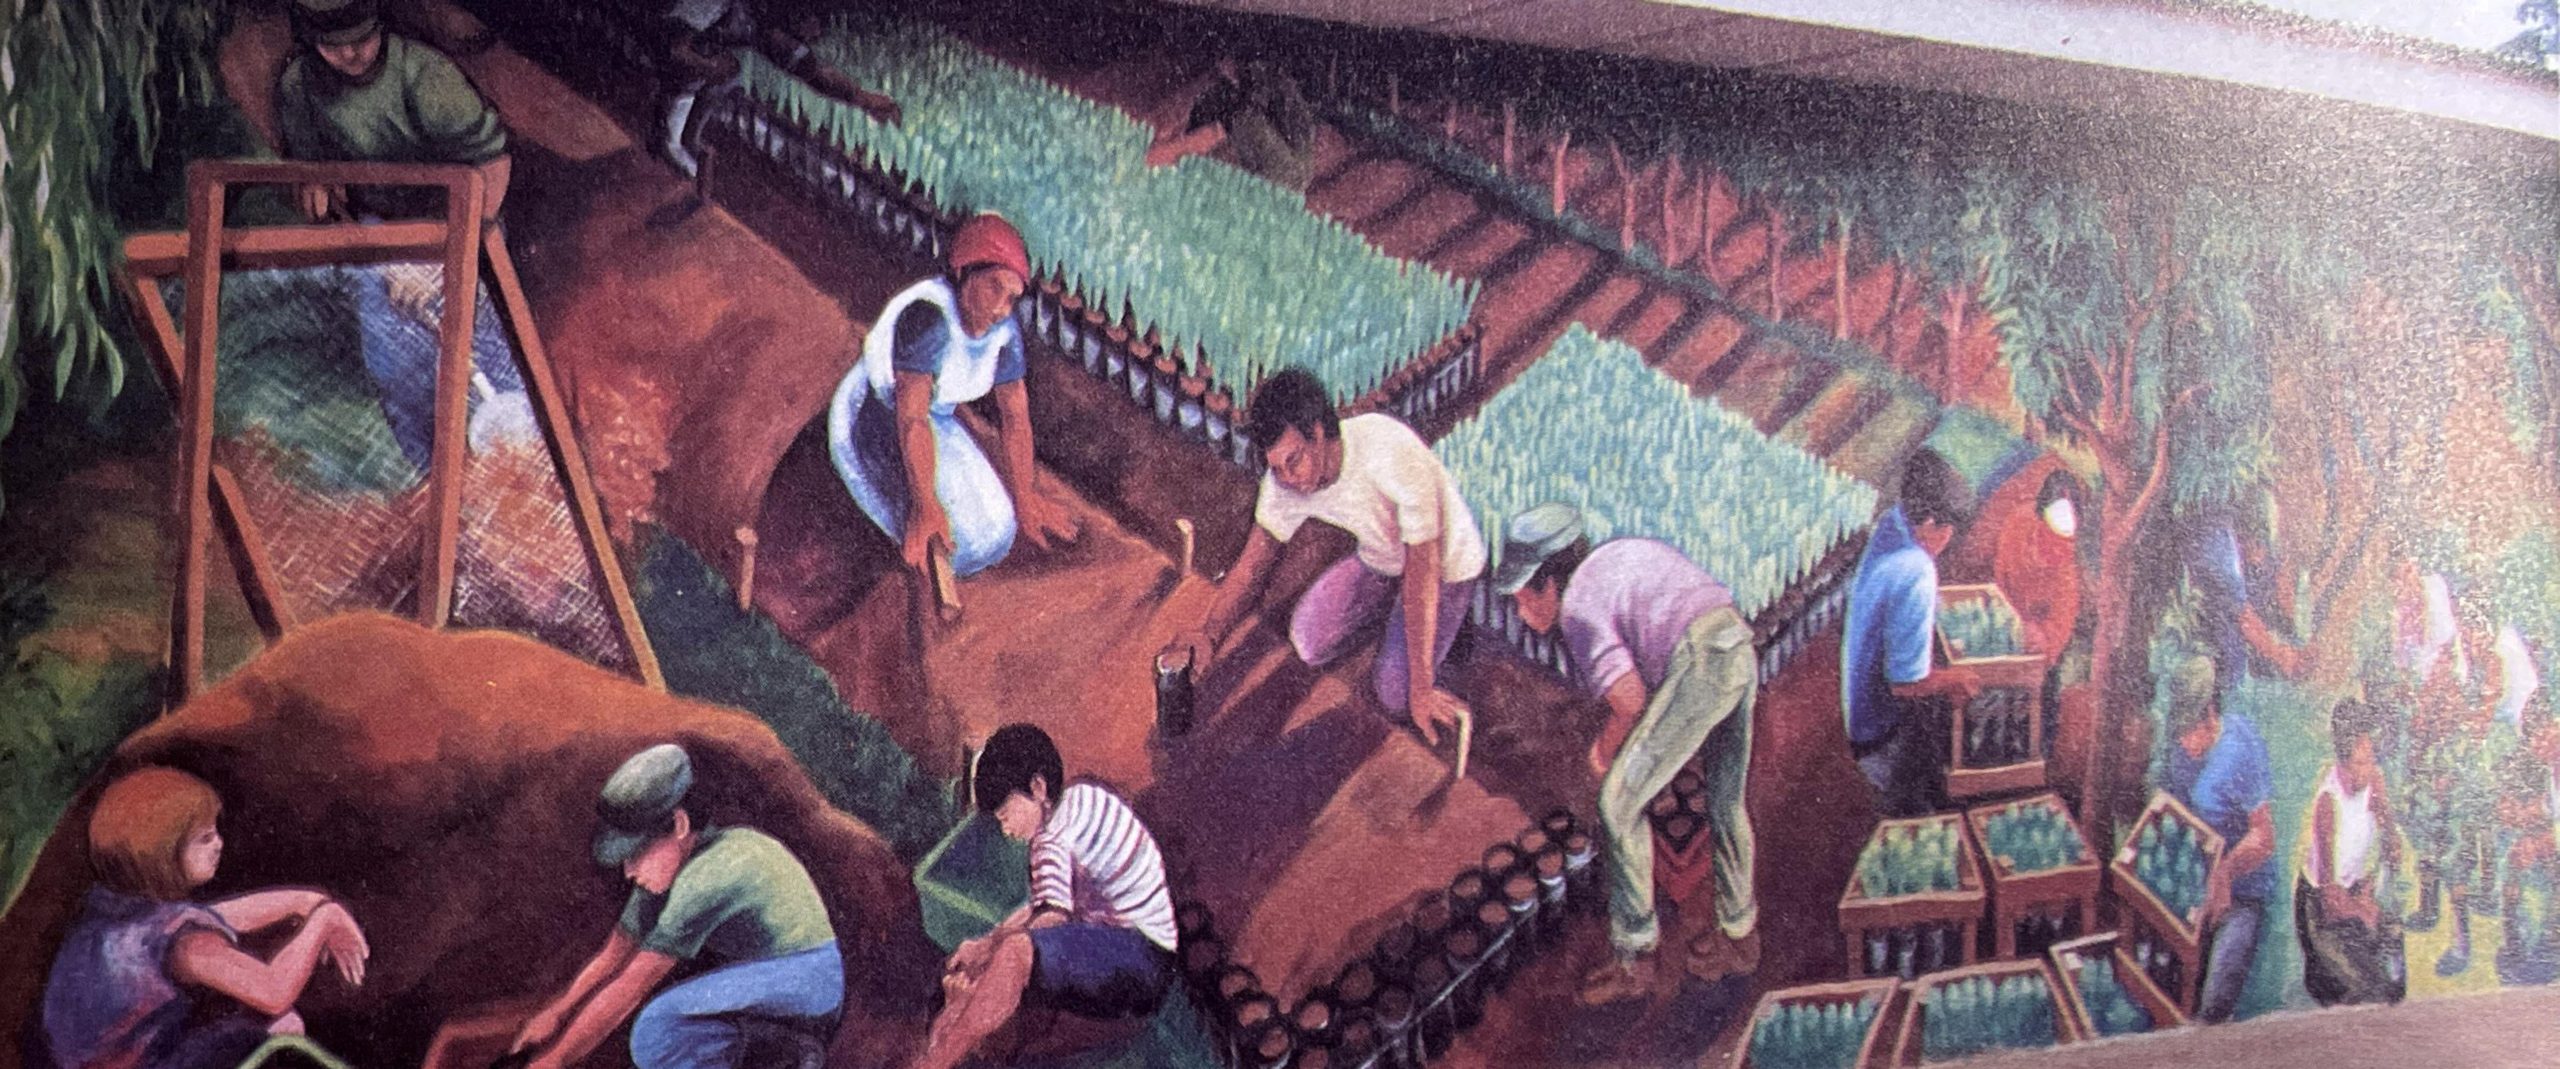 Is This Sweat, or Am I Crying?: A Worker’s History of Farm and Food in the United States